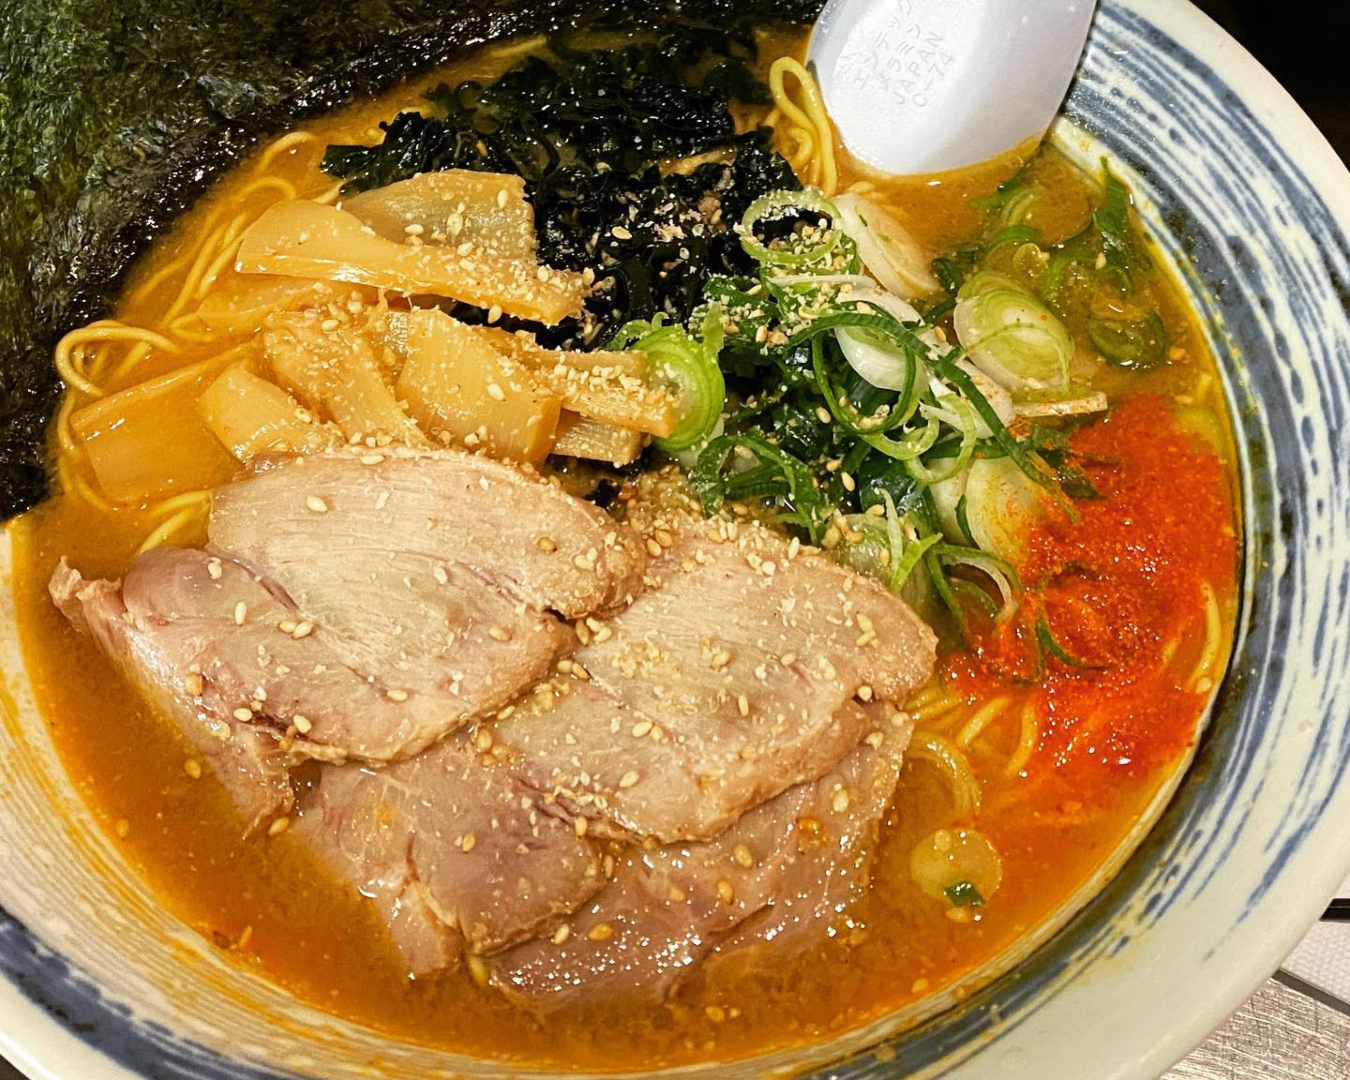 A glorious bowl of TANPOPO ramen featuring slices of pork, spring onion, noodles and more in a fragrant broth. 